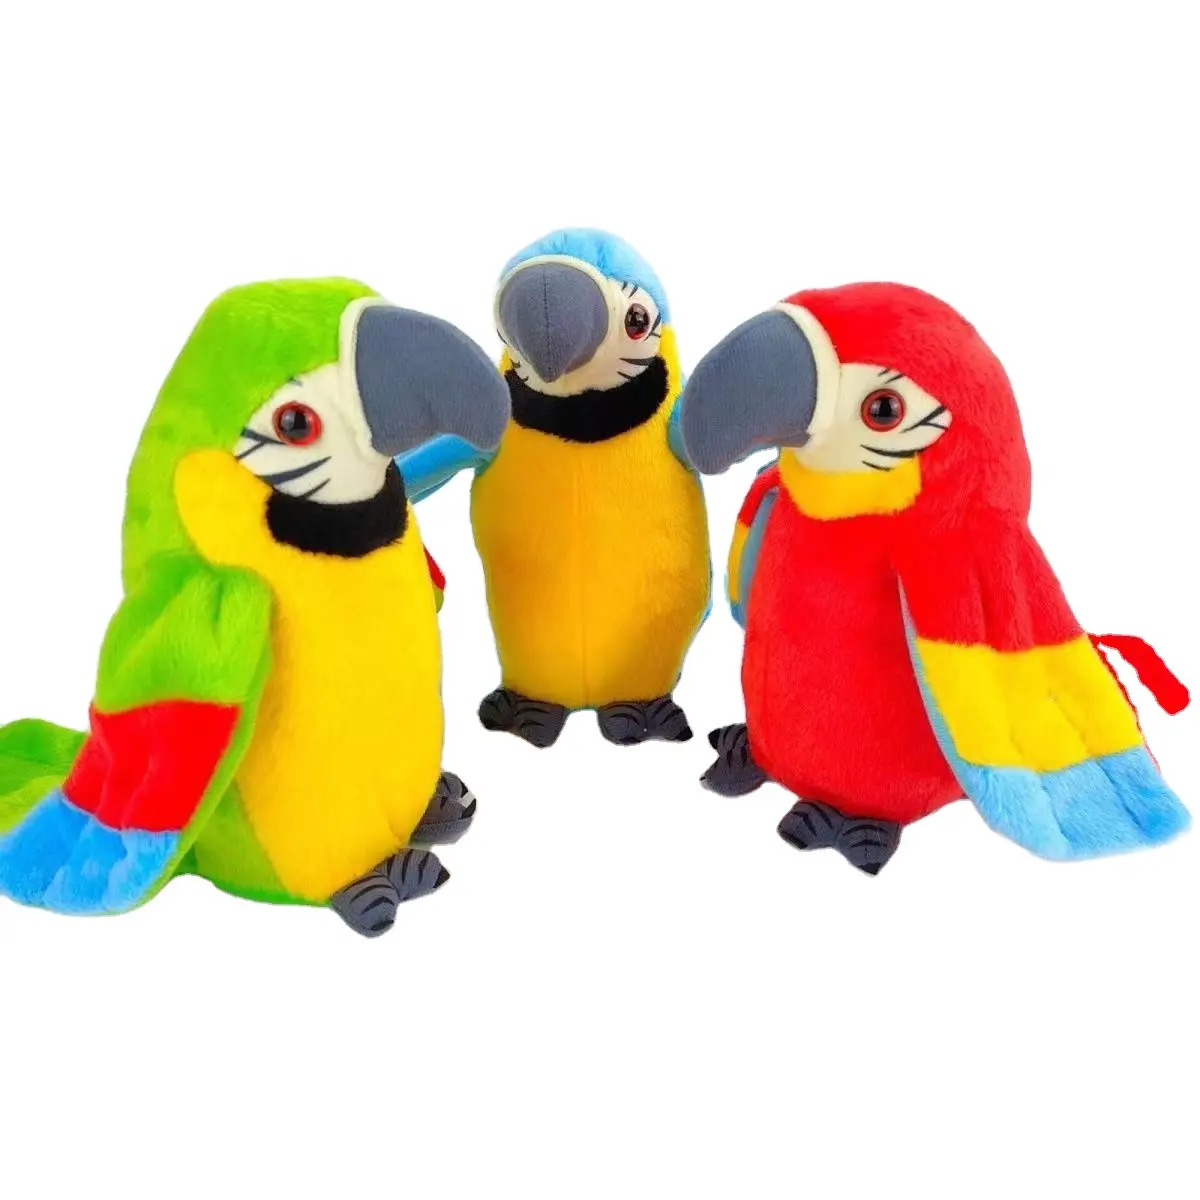 Hot Selling Electric Talking Parrot Plush Toy Cute Speaking Electric Bird Stuffed Plush Toy Birthday Gift